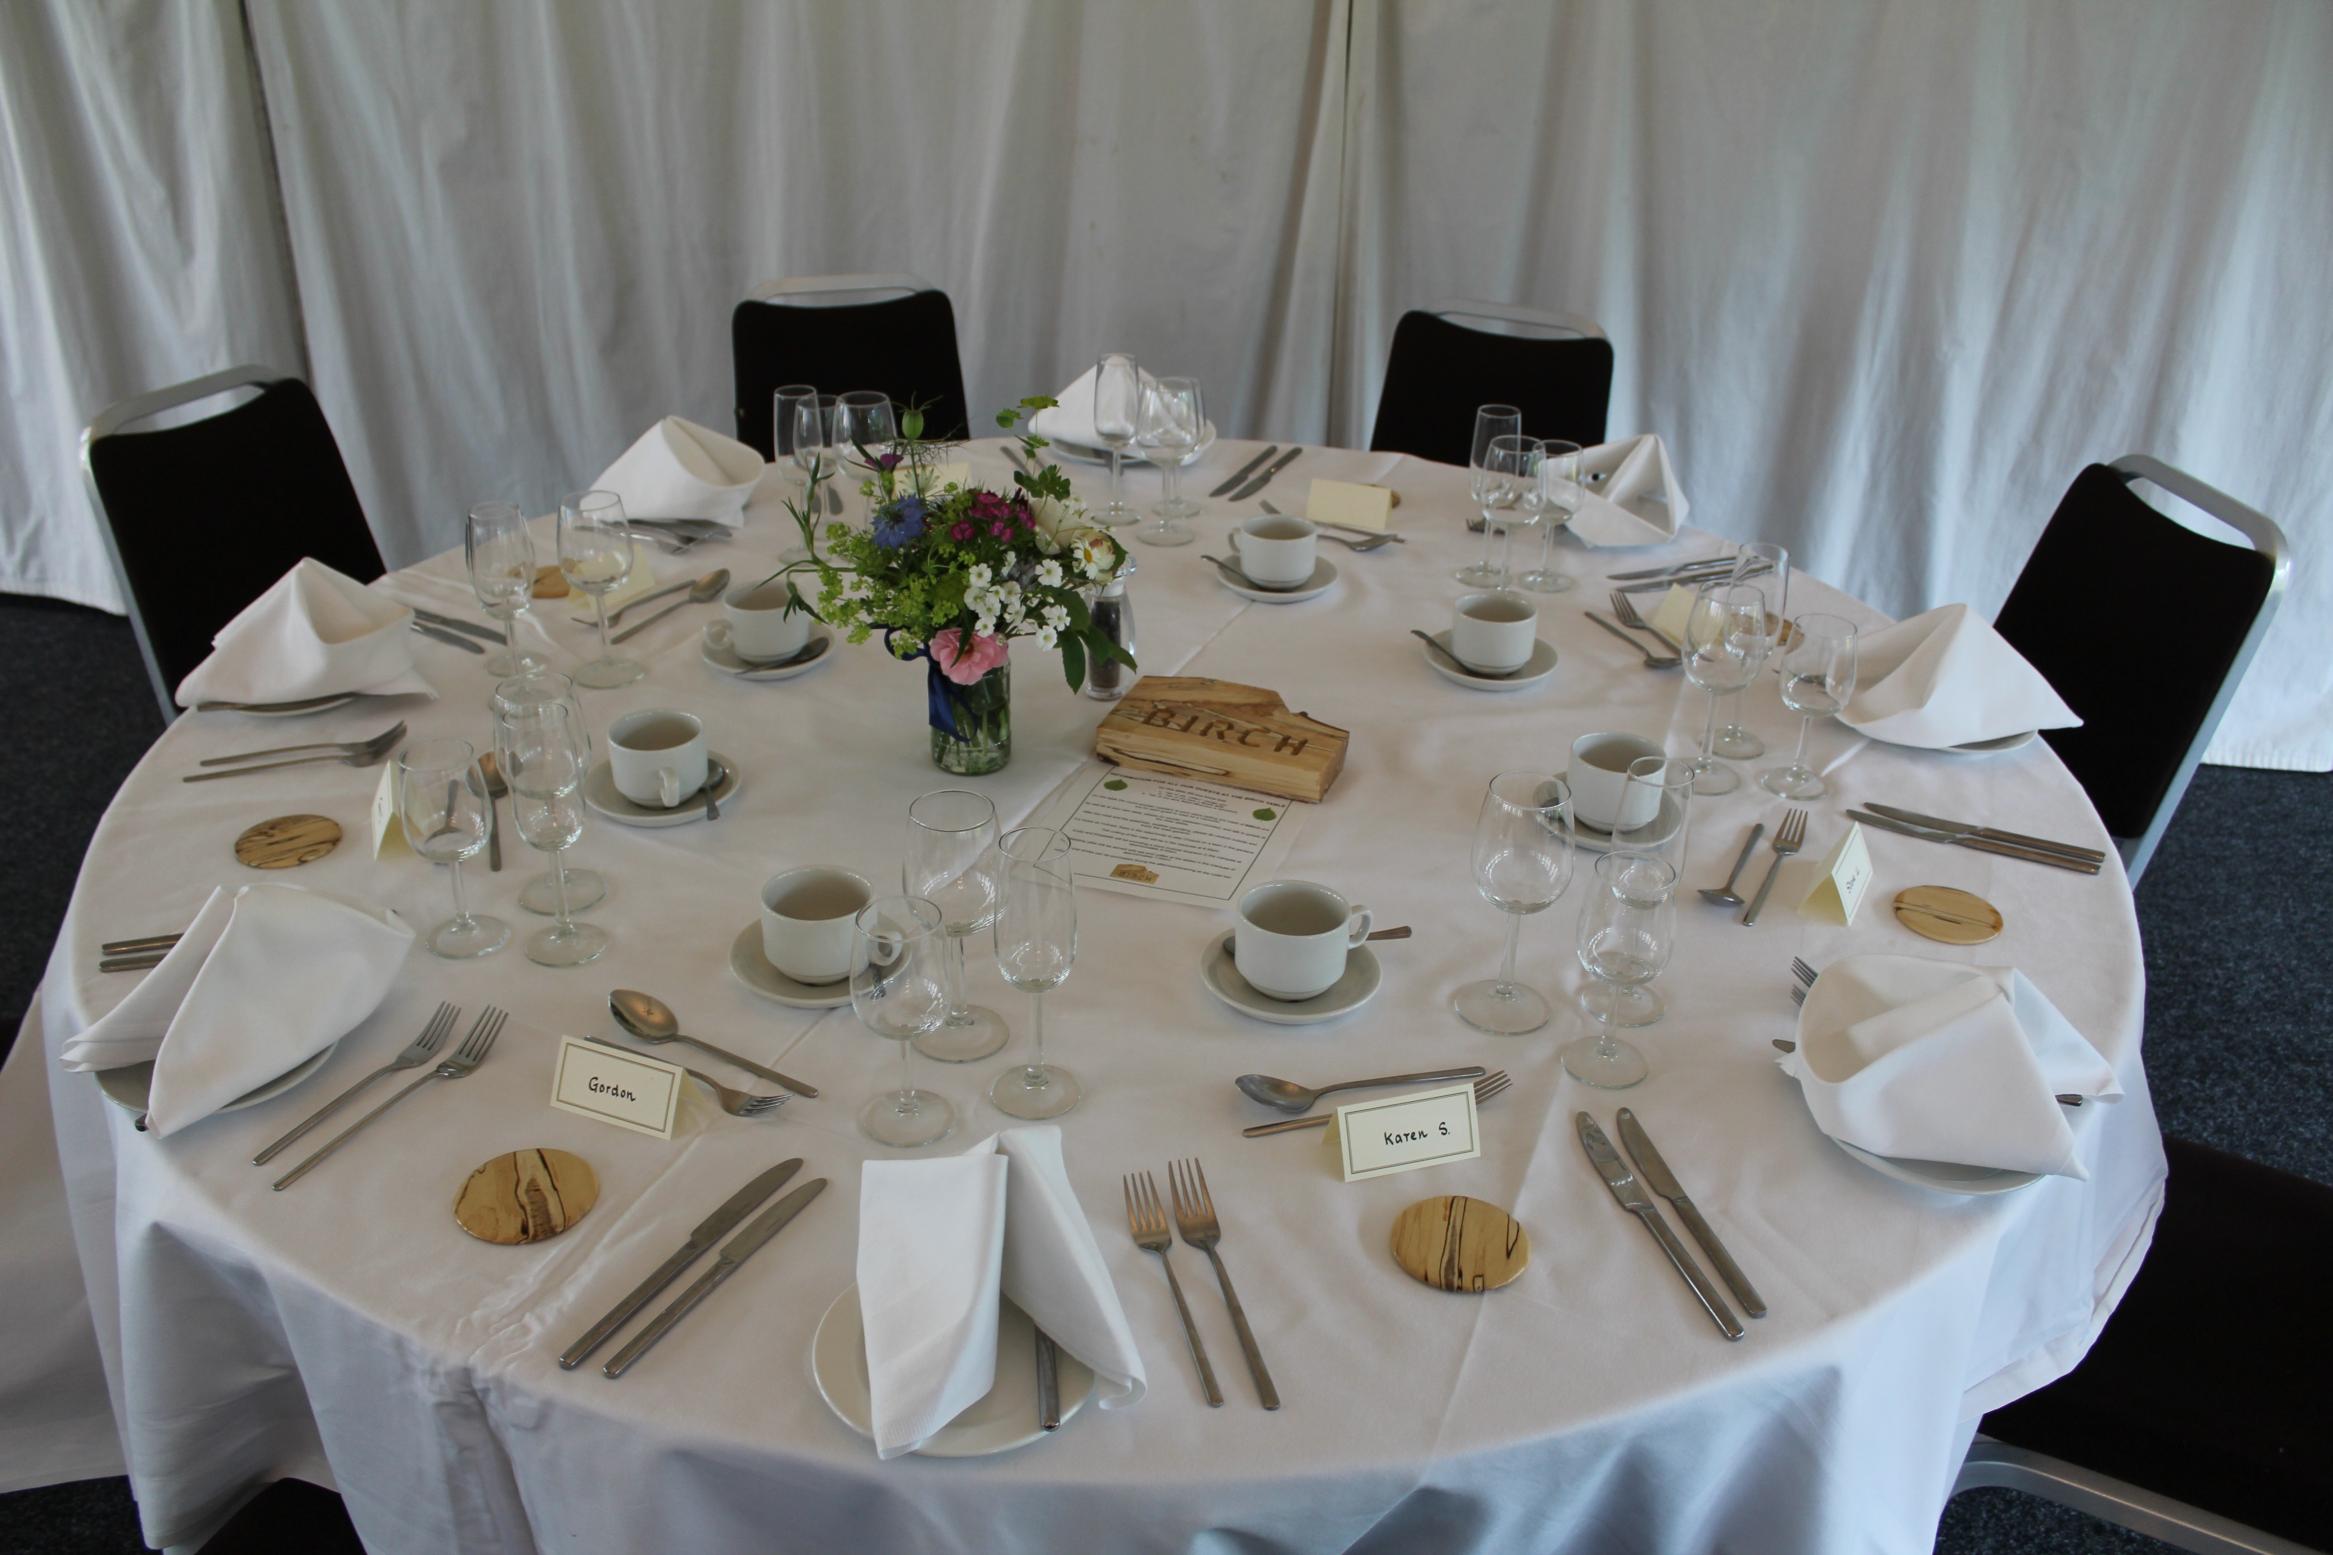 Monday morning 5th June, the Birch table set for the reception at Hunton Park Hotel